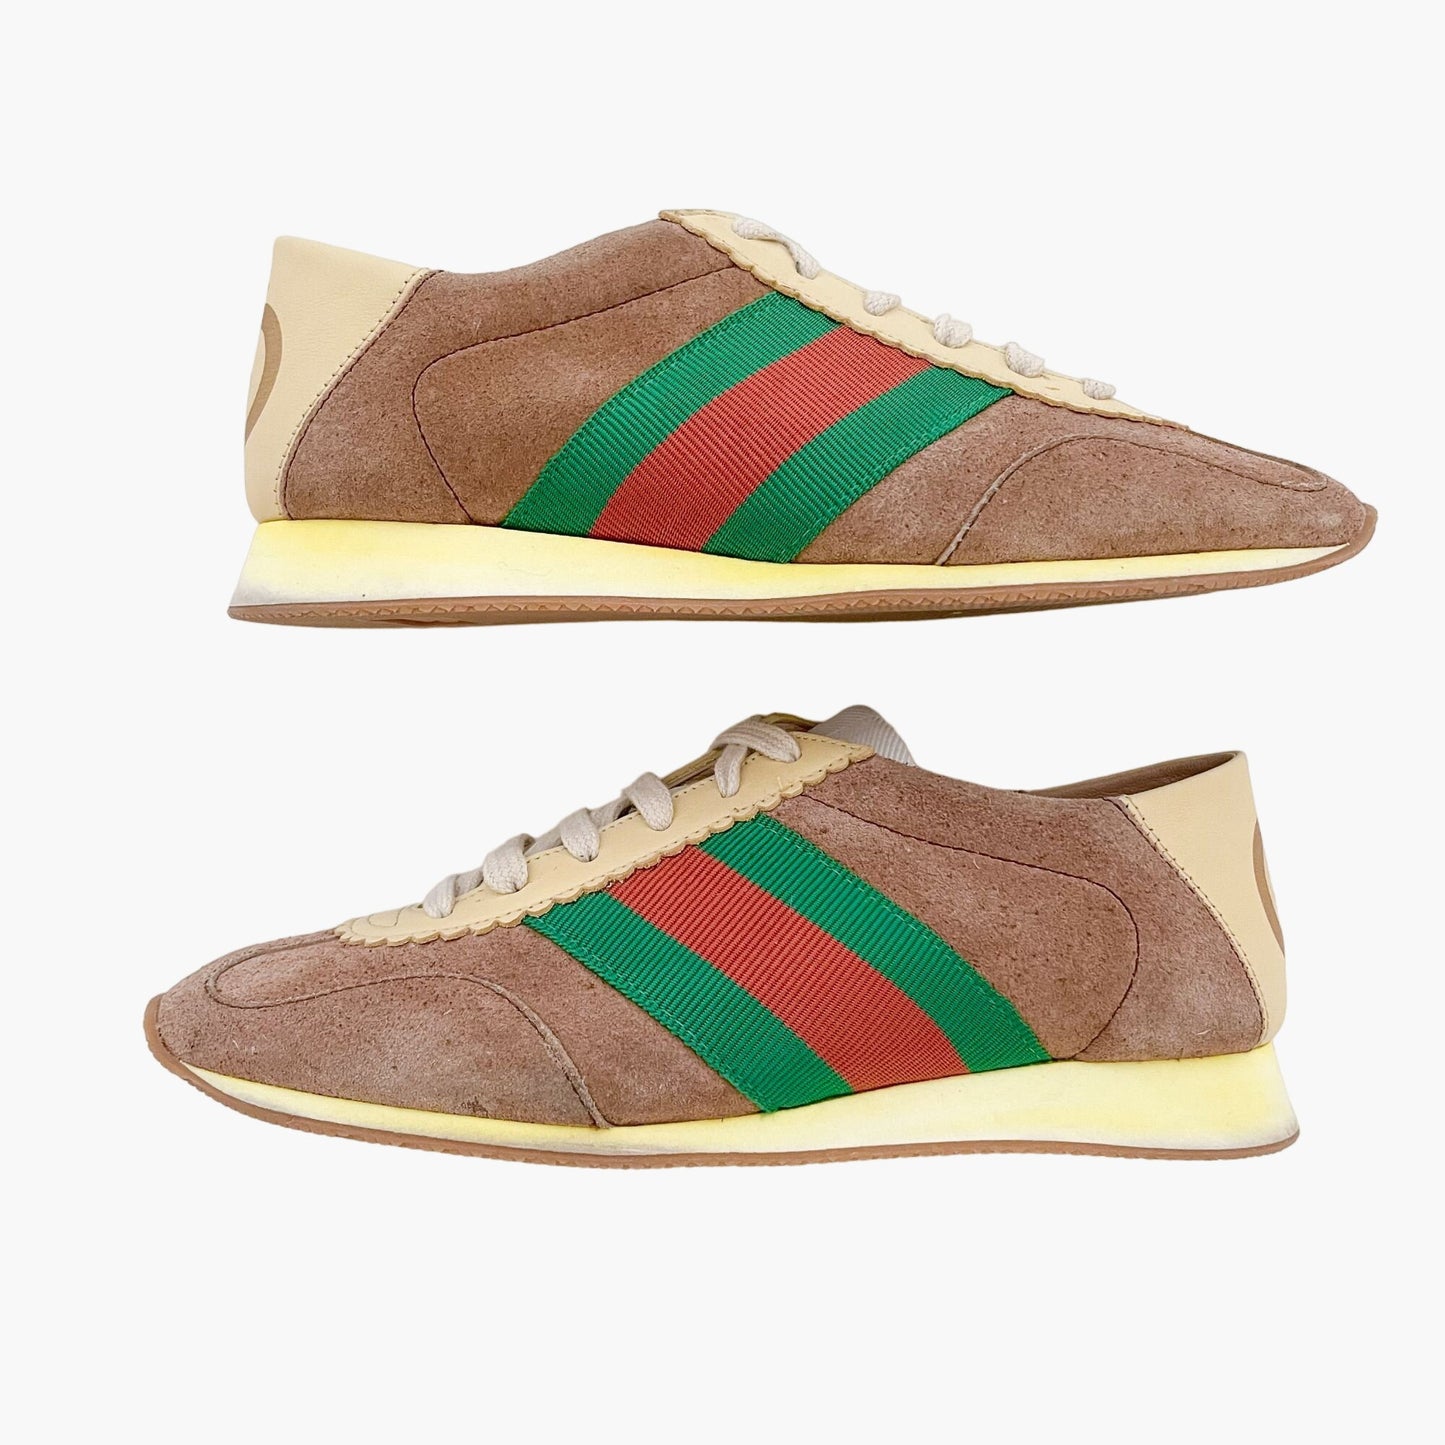 Gucci Rocket Collapsible Sneakers in Tan Suede Size 36